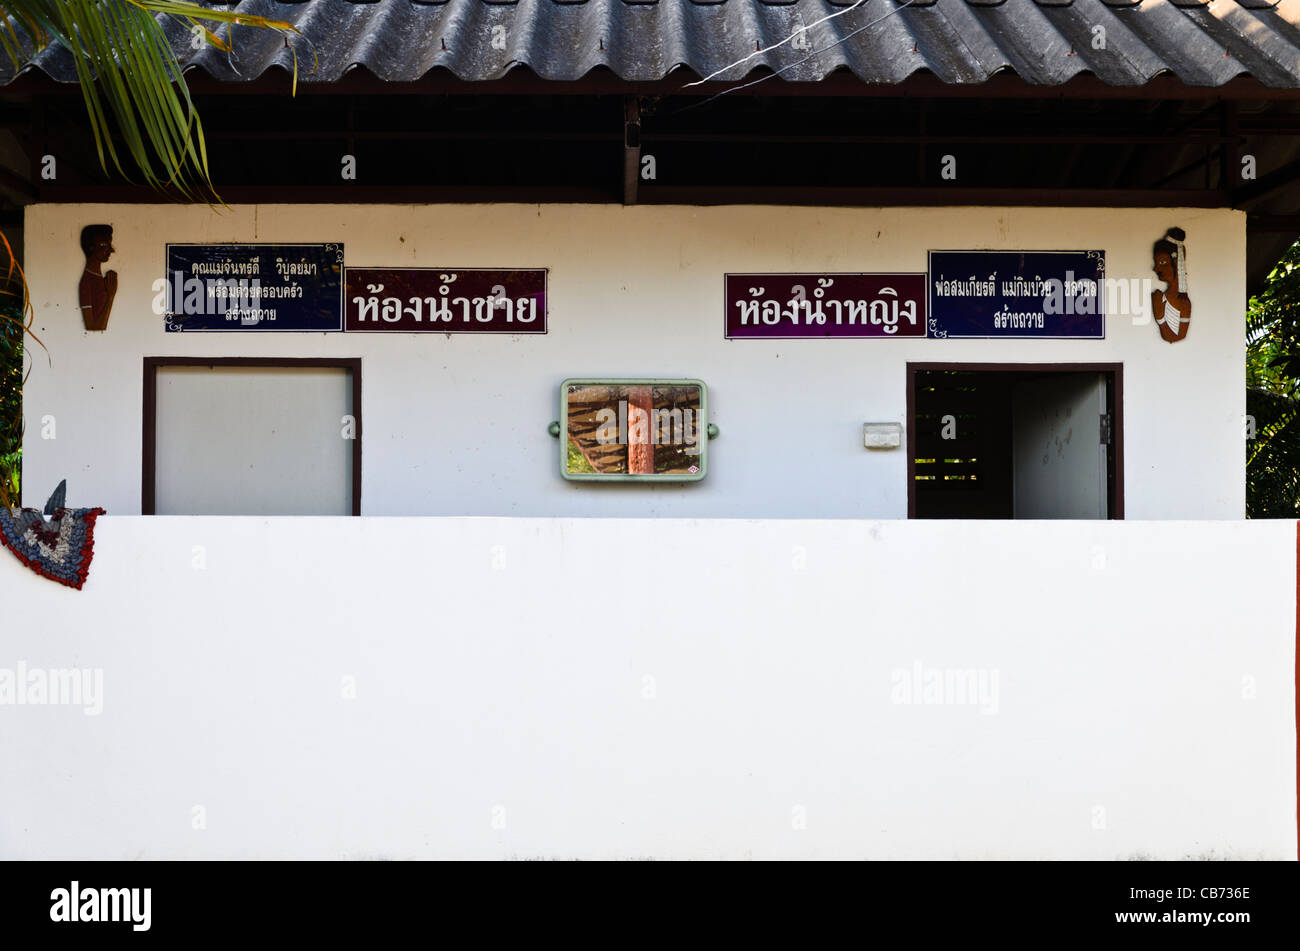 Restroom building with white walls & figures of man by left door and woman by right door with Thai writing in northern Thailand Stock Photo